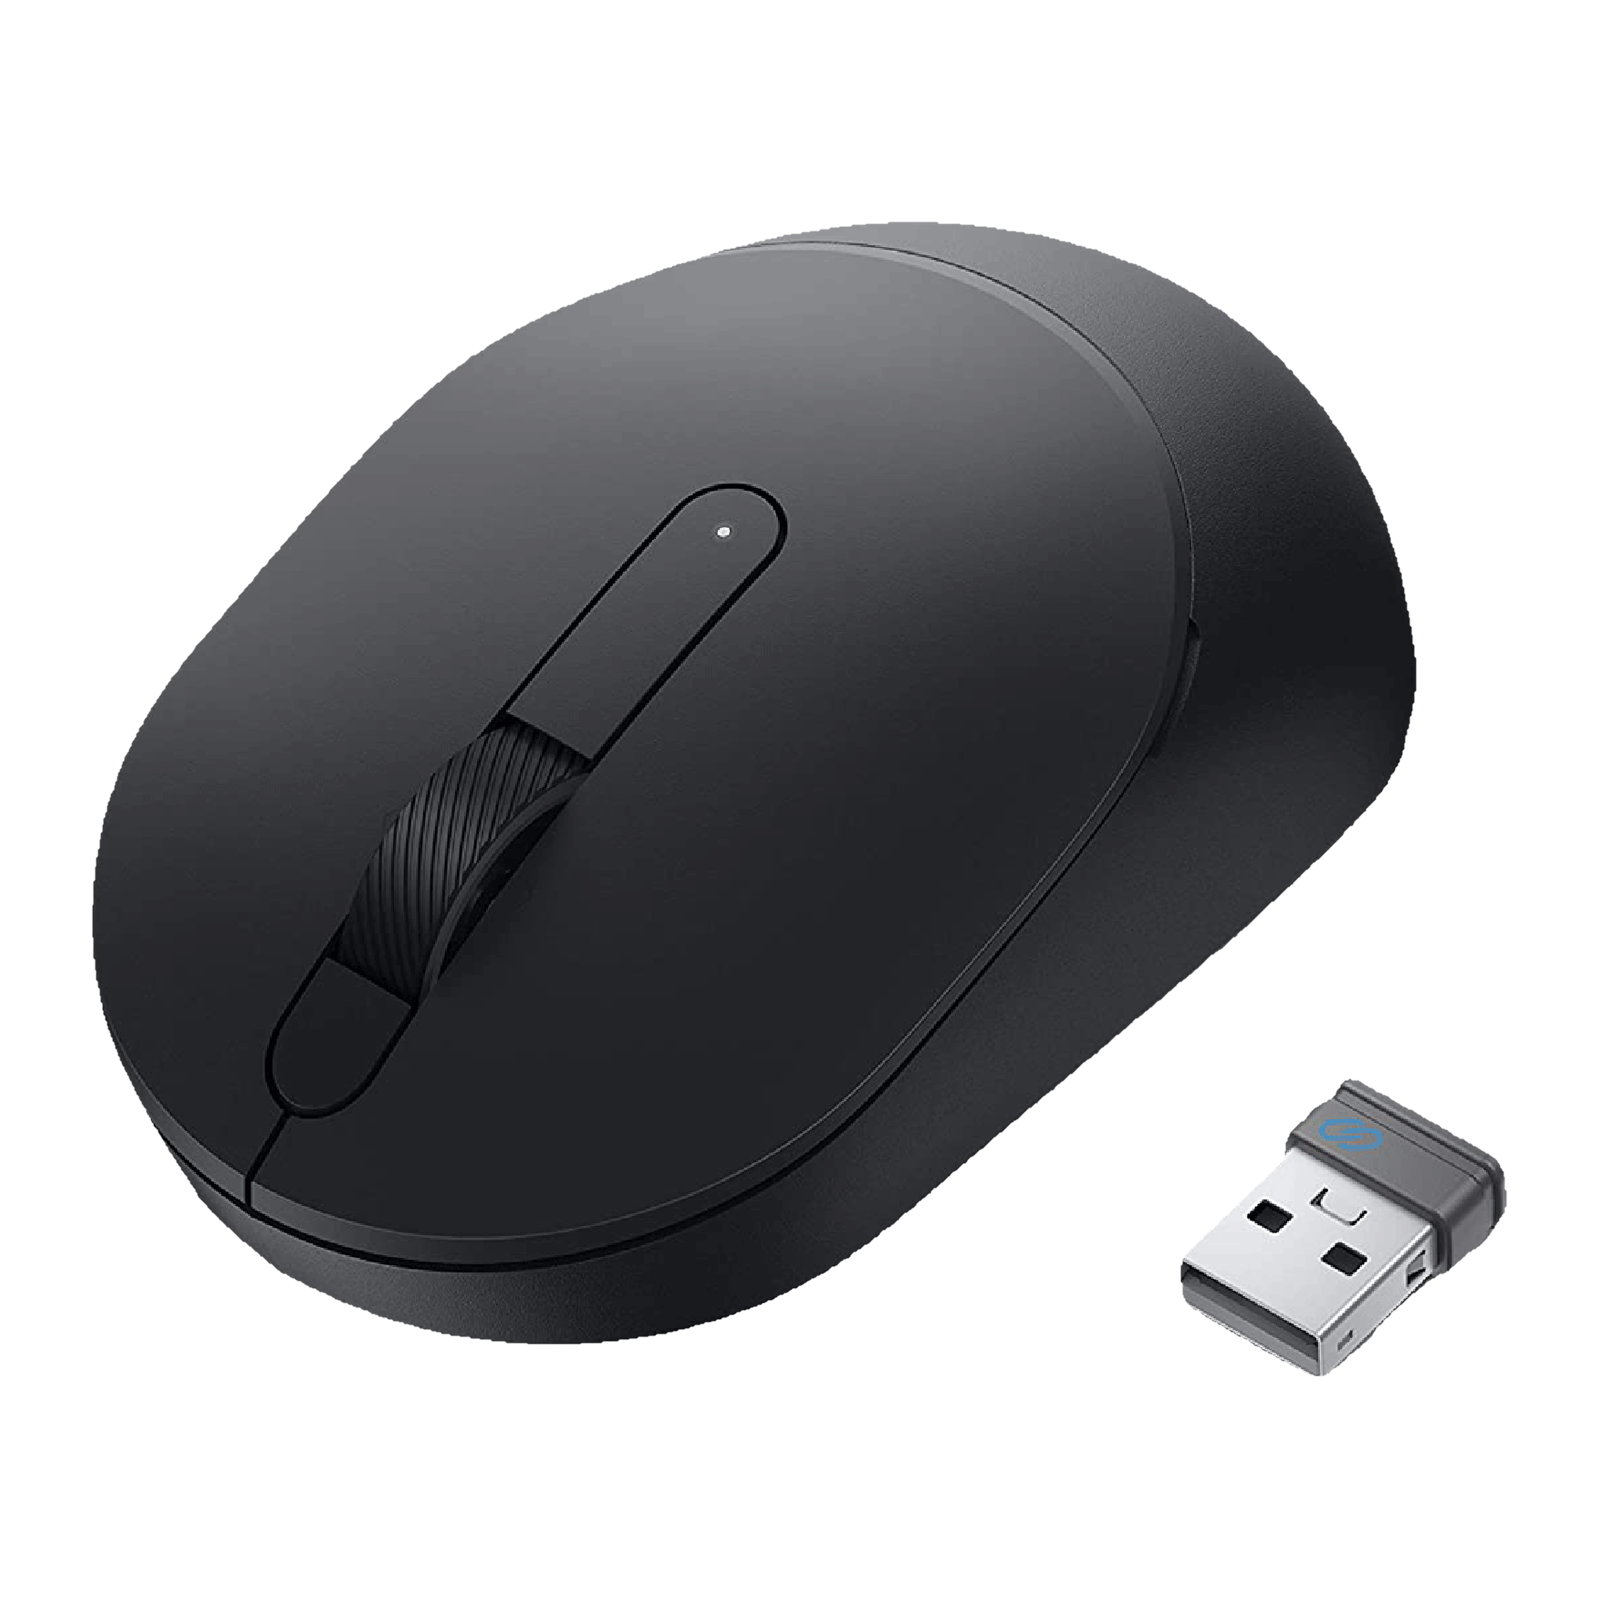 buy-dell-mobile-wireless-optical-mouse-16000-dpi-easy-pairing-black-online-croma